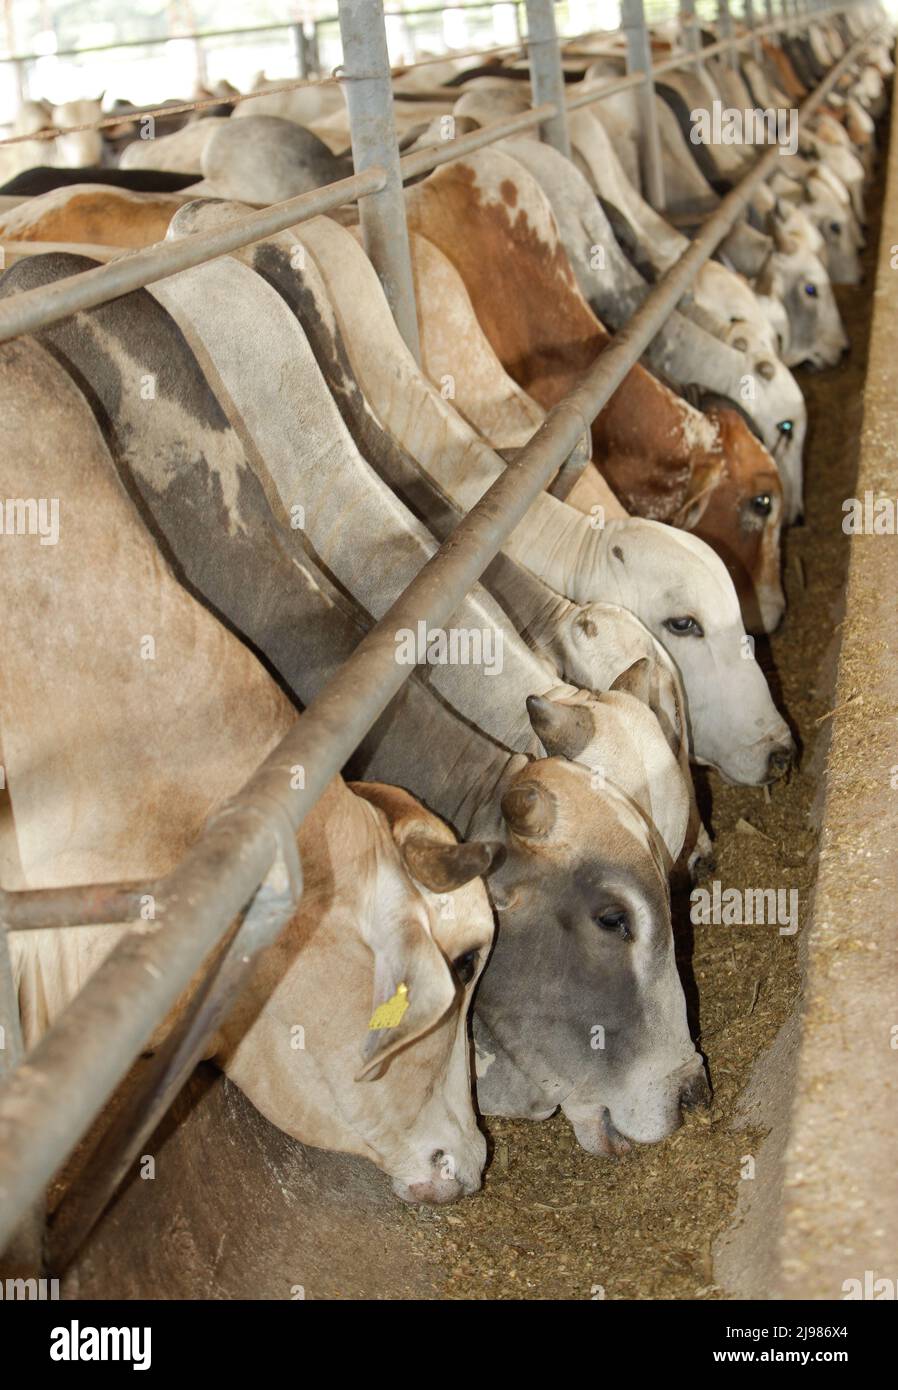 Cattle farm in North Brazil, Pará State, Amazon. Cows eating silage. Stock Photo